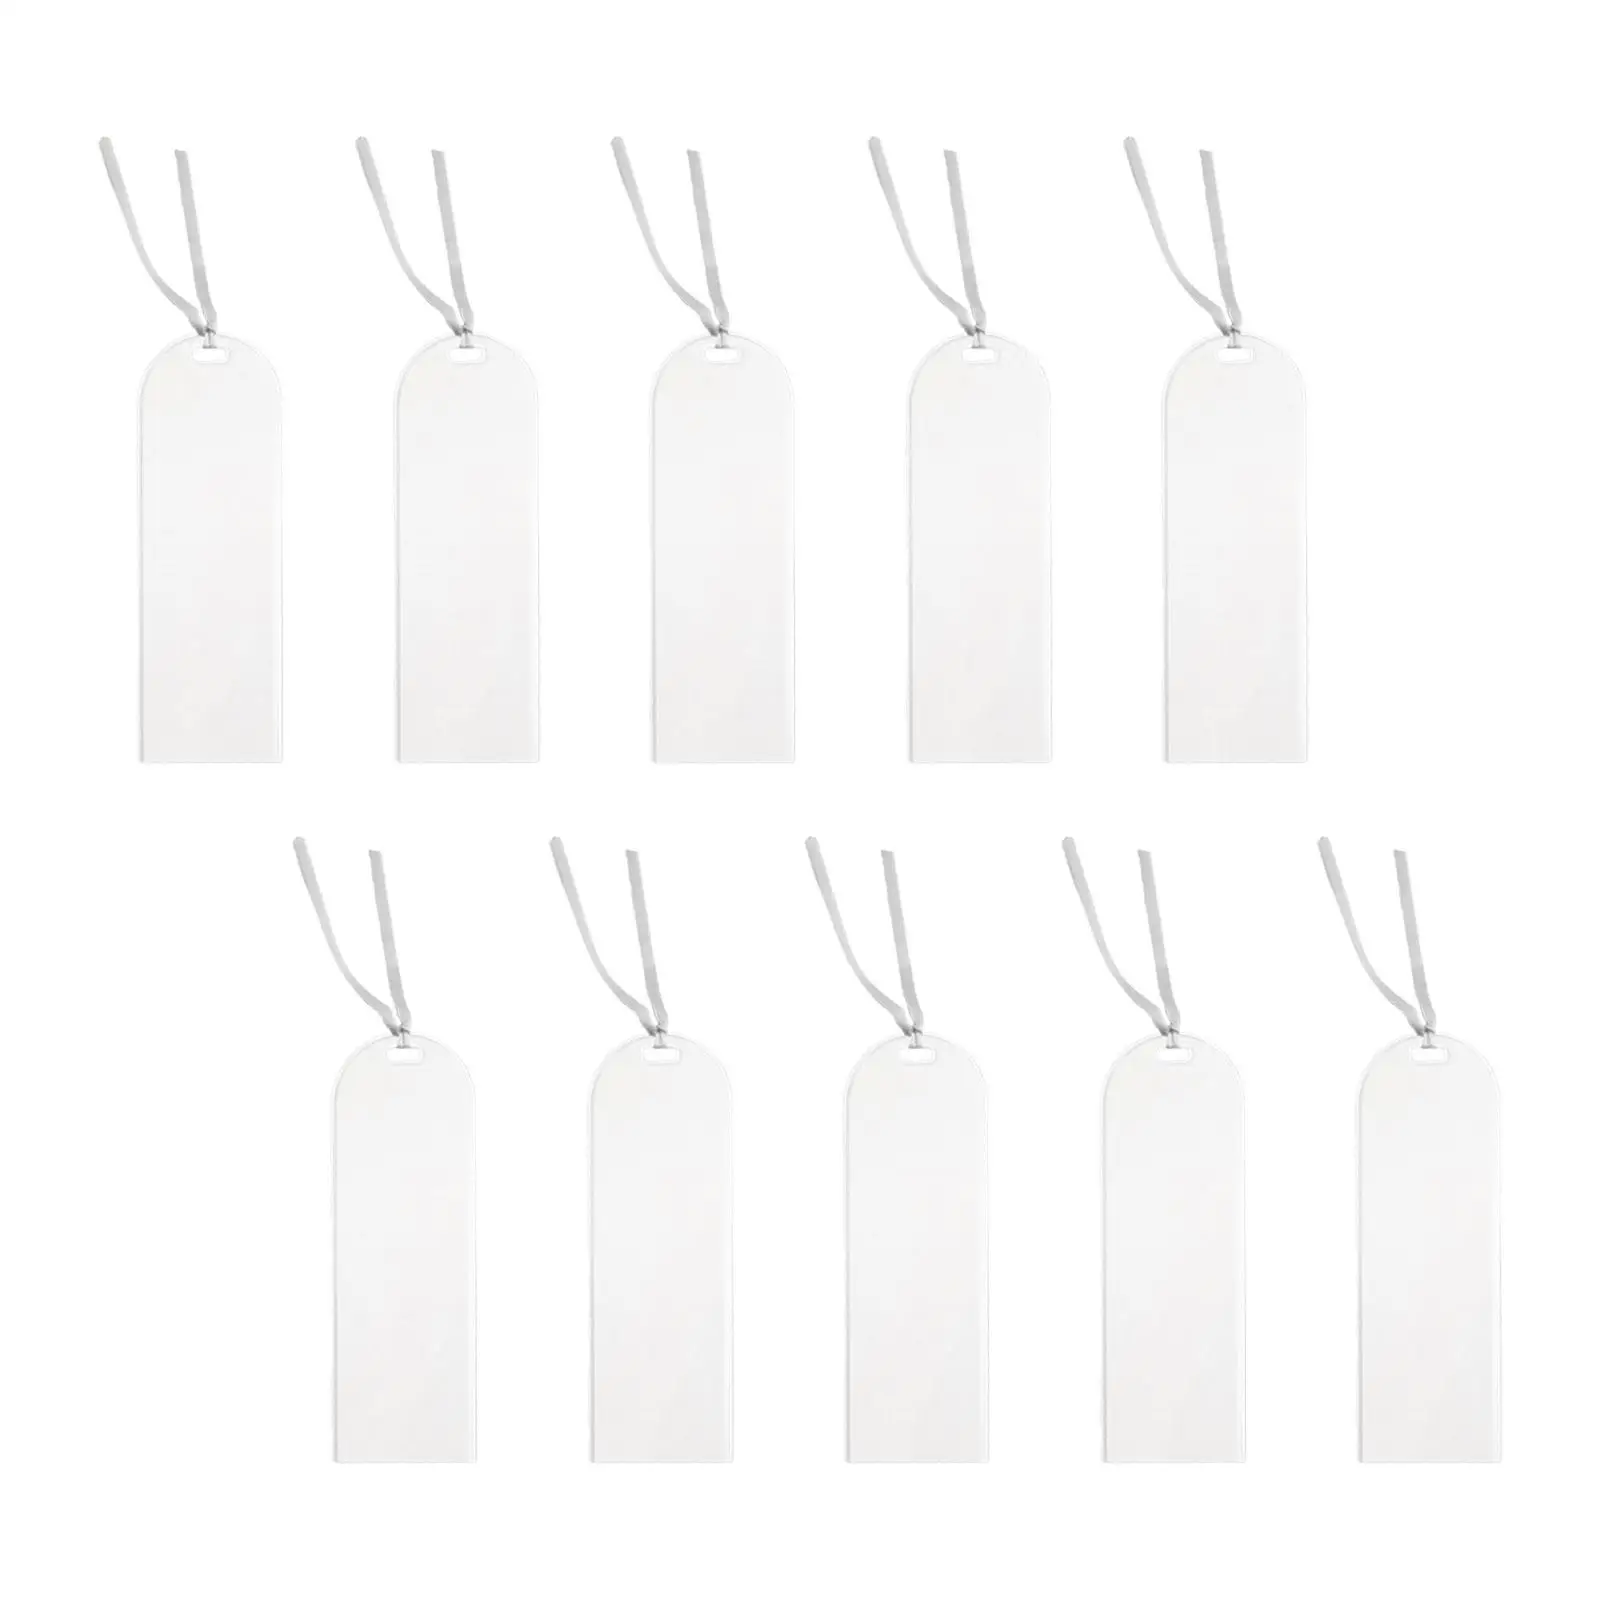 

10x Acrylic Bookmark Blanks DIY Clear Book Markers for Gifts Tags Keychains Hanging Ornament Handicraft Decorations Art Supplies